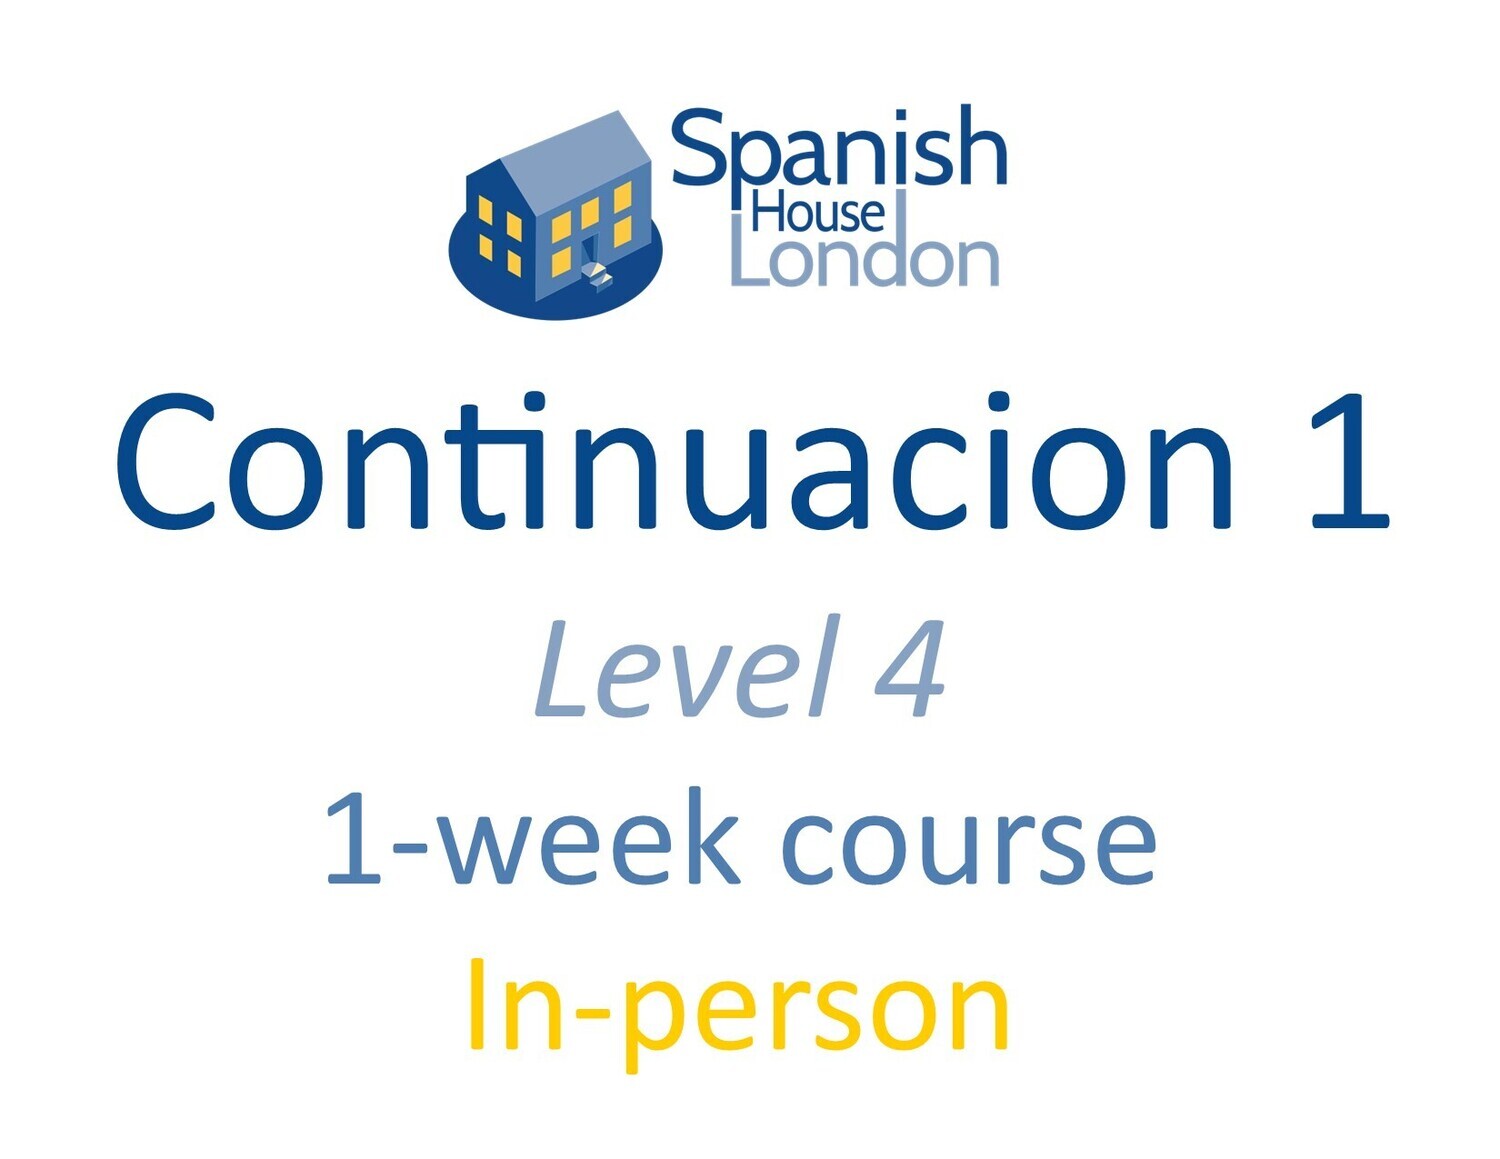 One-Week Intensive Continuacion 1 Course starting on 27th November at 10.30am in Clapham North